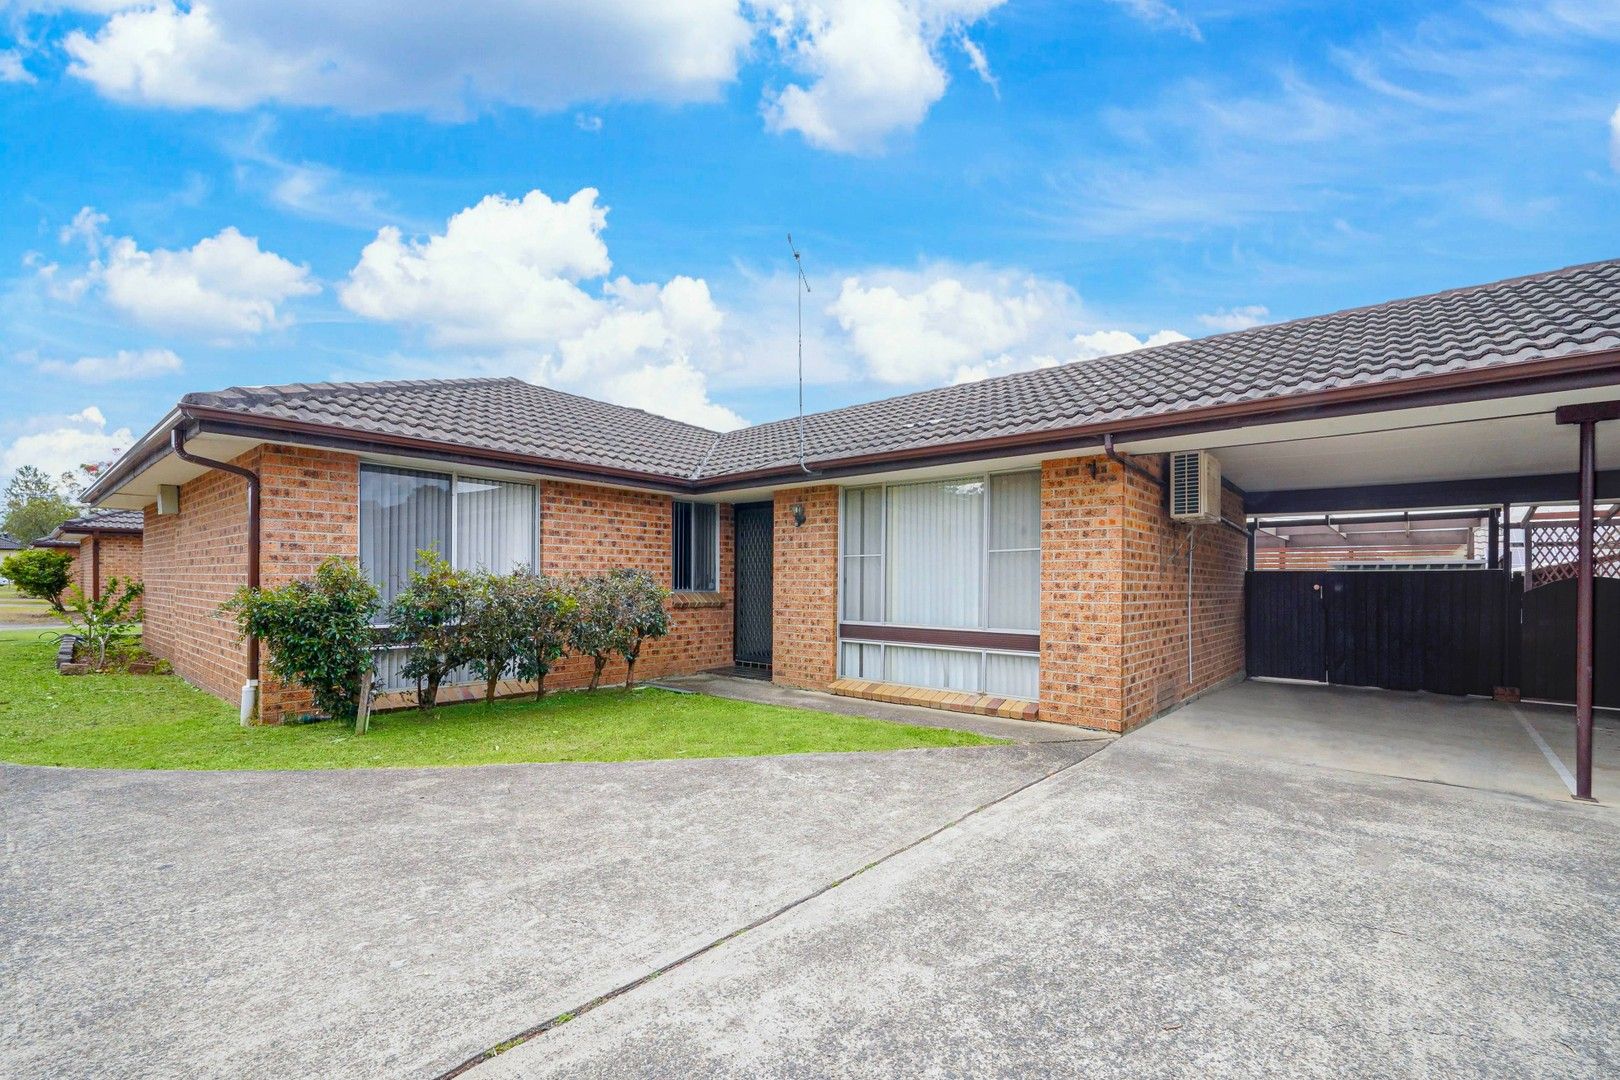 2 bedrooms Villa in 5/21 Second Ave MACQUARIE FIELDS NSW, 2564